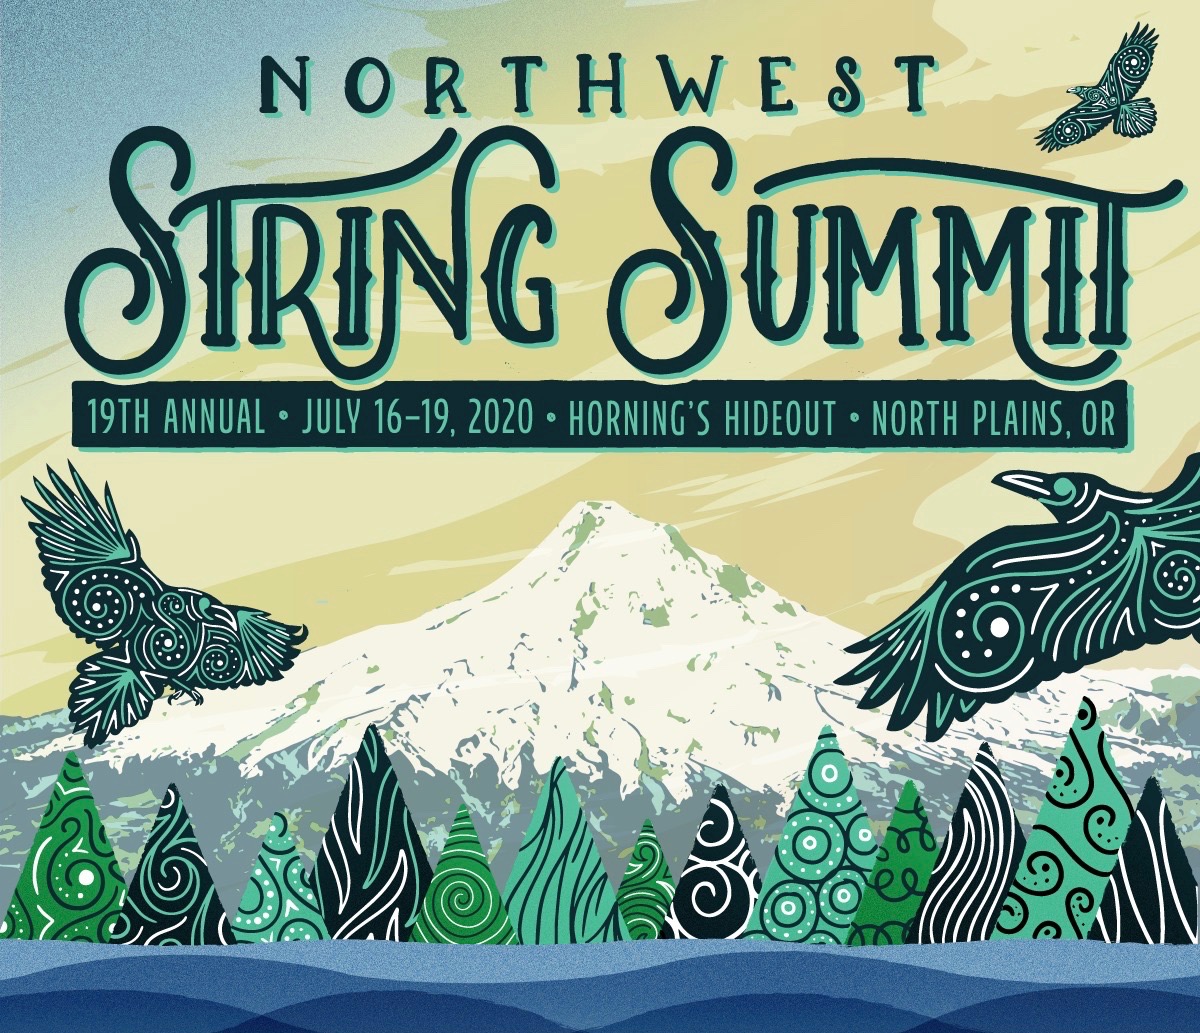 Northwest String Summit Completes Lineup: Leftover Salmon ft. Bonnie Paine, Goose, Cosmic Twang and More